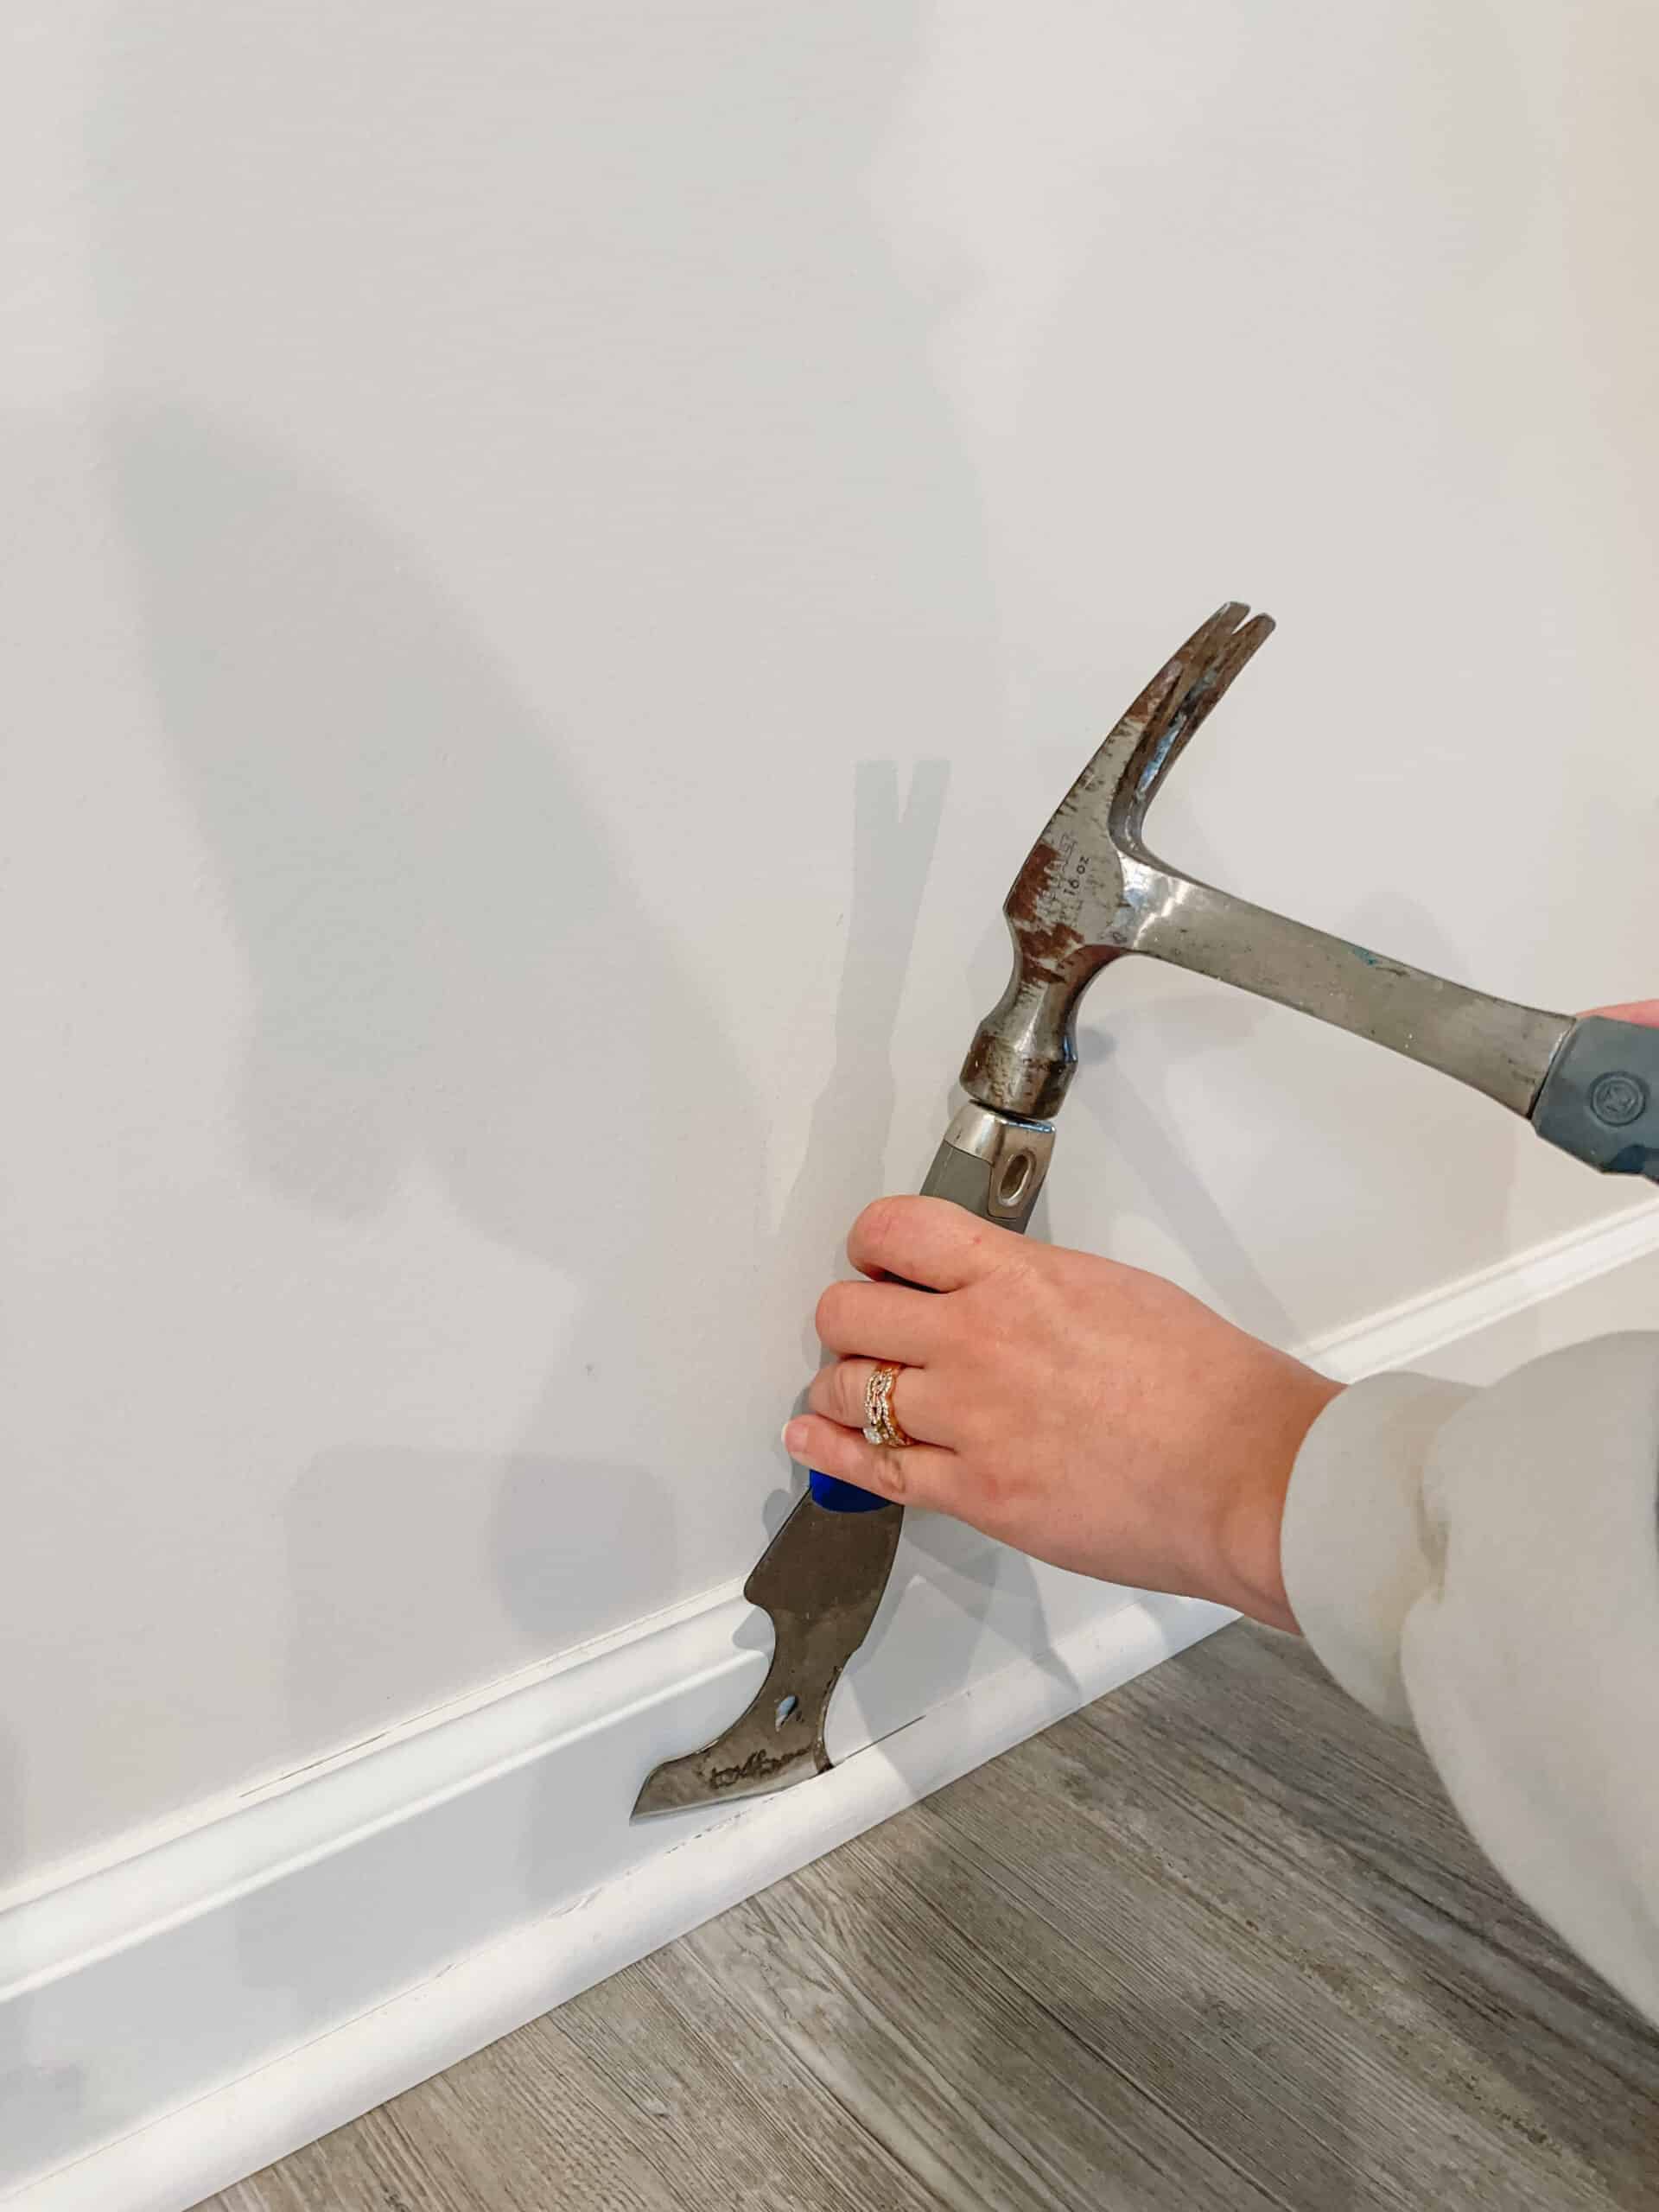 Trim Puller review- How to pull off baseboards and trim 